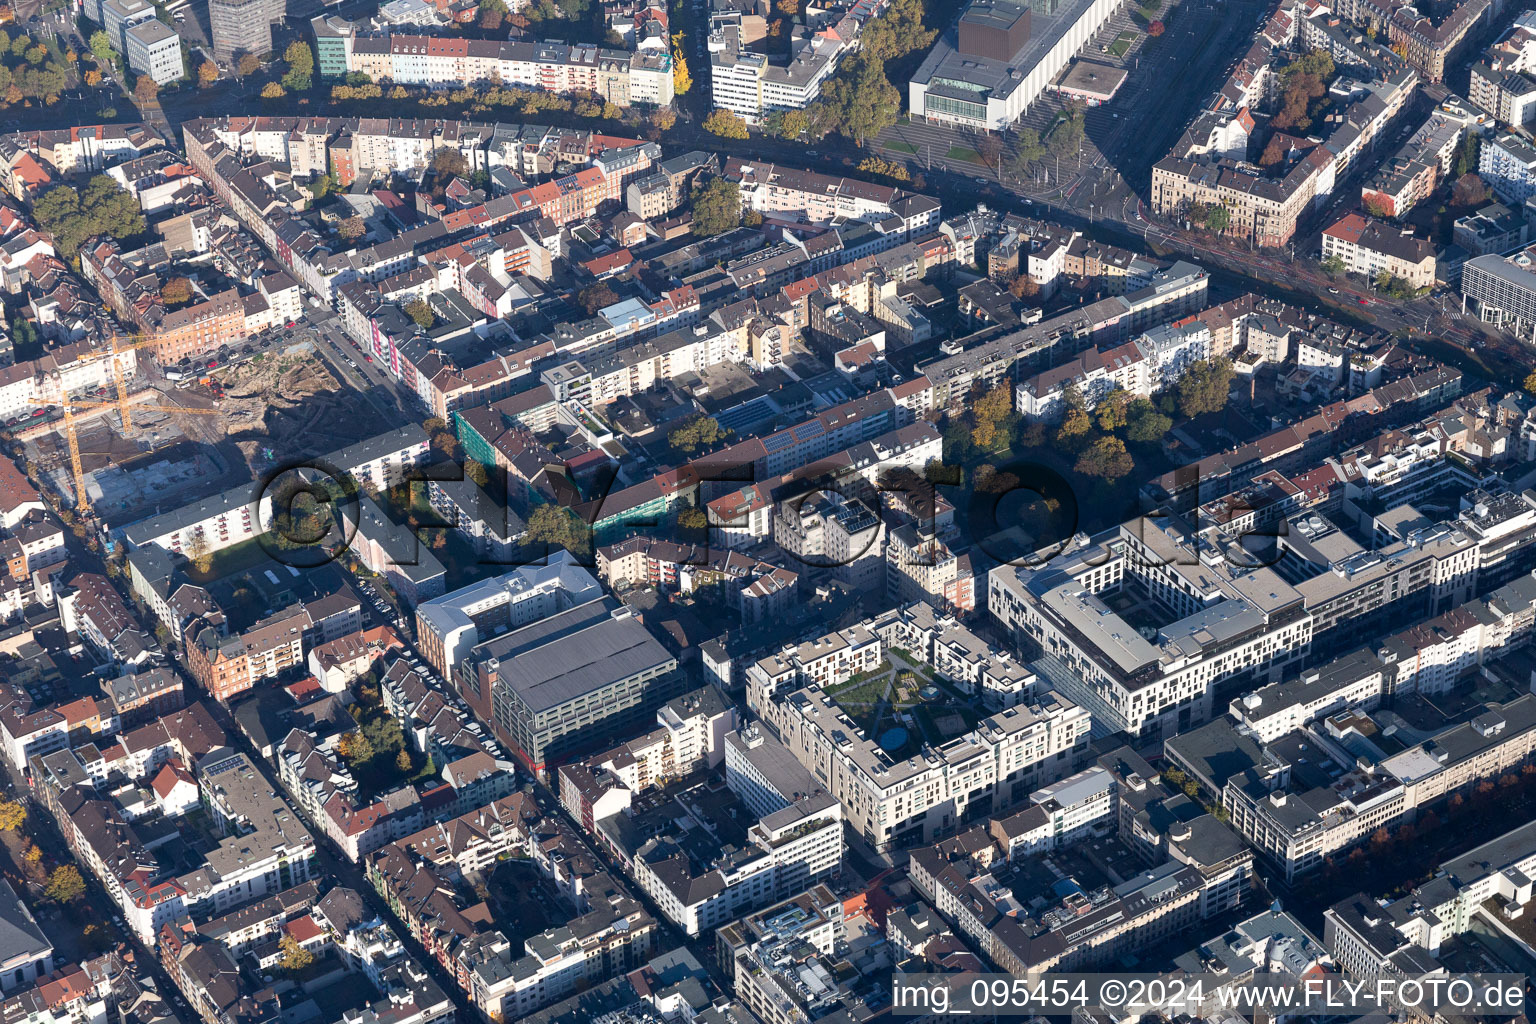 Aerial view of City of squares in the horseshoe of the Ring in the district Innenstadt in Mannheim in the state Baden-Wuerttemberg, Germany